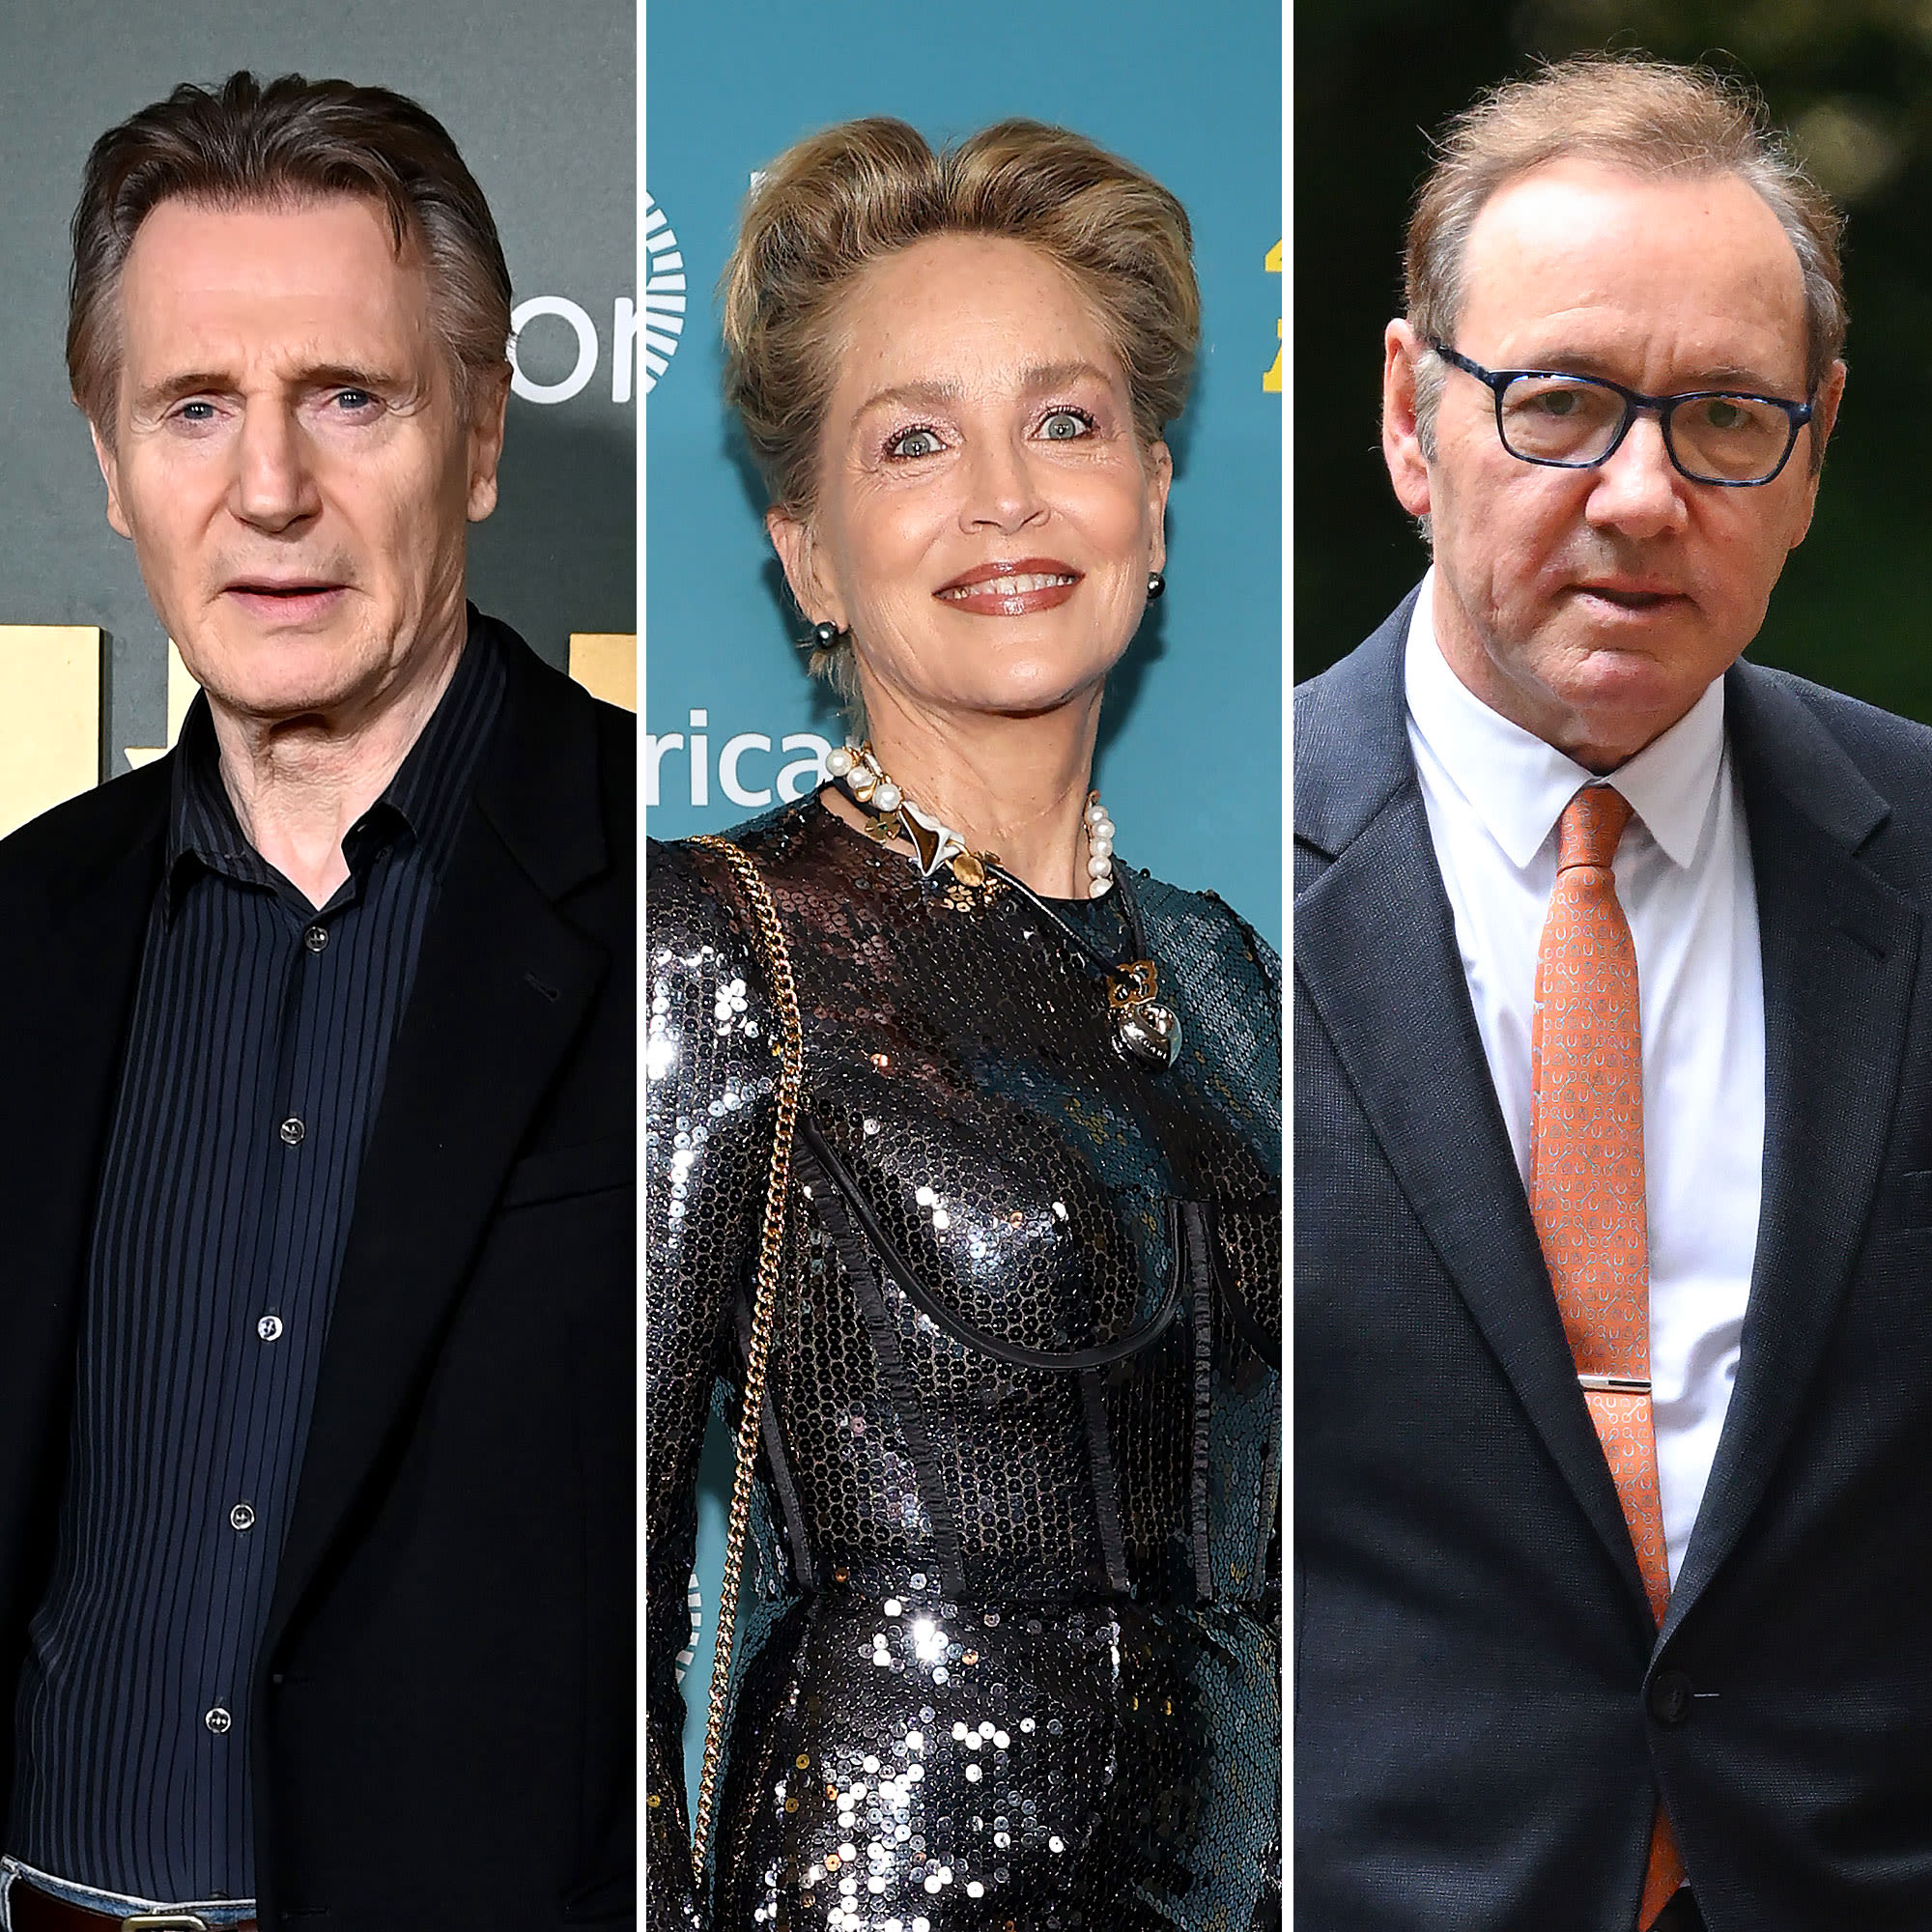 Liam Neeson, Sharon Stone and More Call for Kevin Spacey’s Hollywood Return: ‘Kevin Is a Good Man’